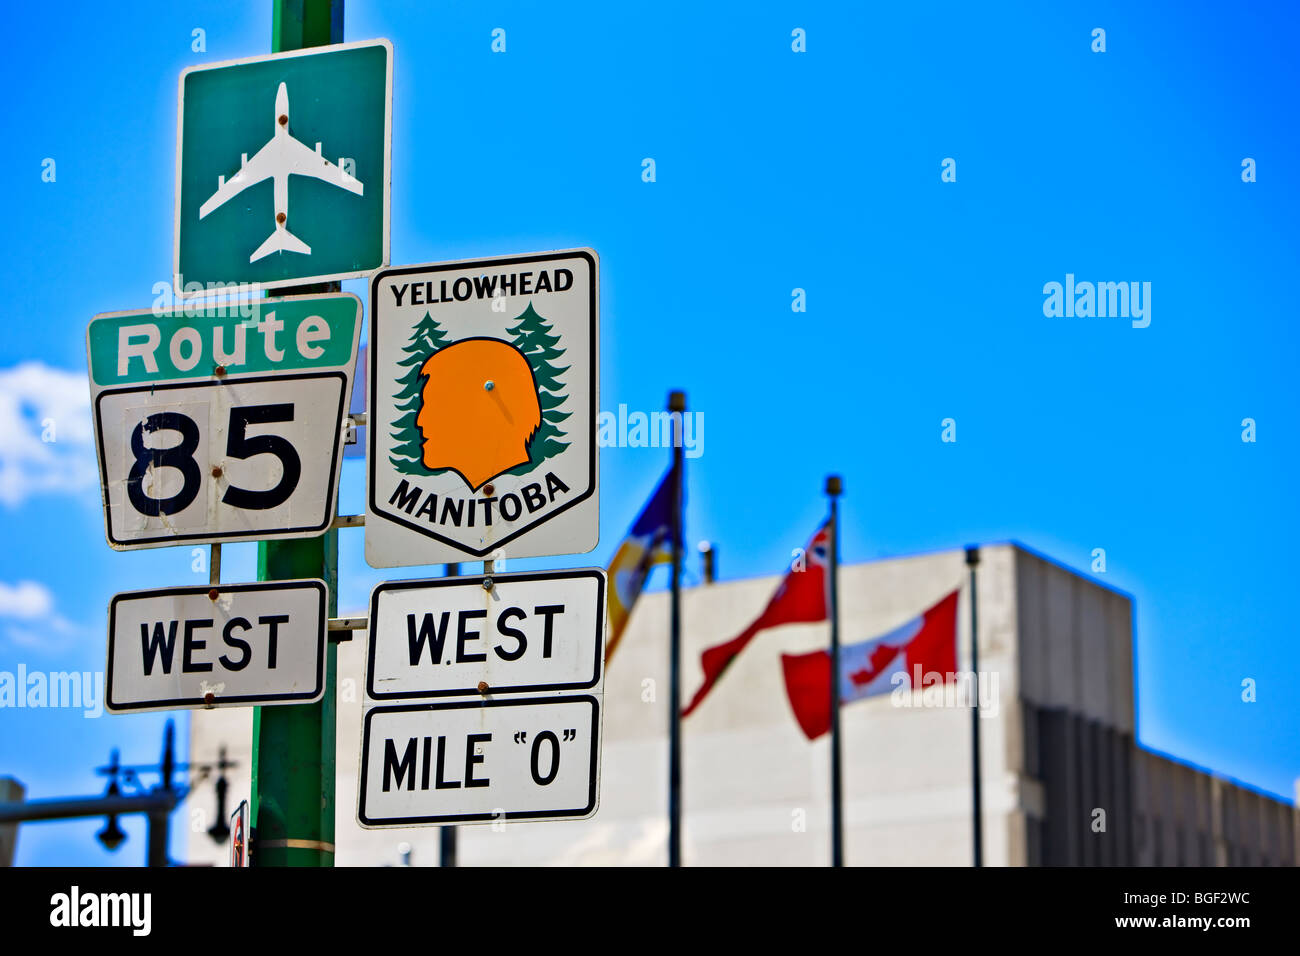 Street Signs including Mile 0 of the Yellowhead Highway in the City of Winnipeg, Manitoba, Canada. Stock Photo